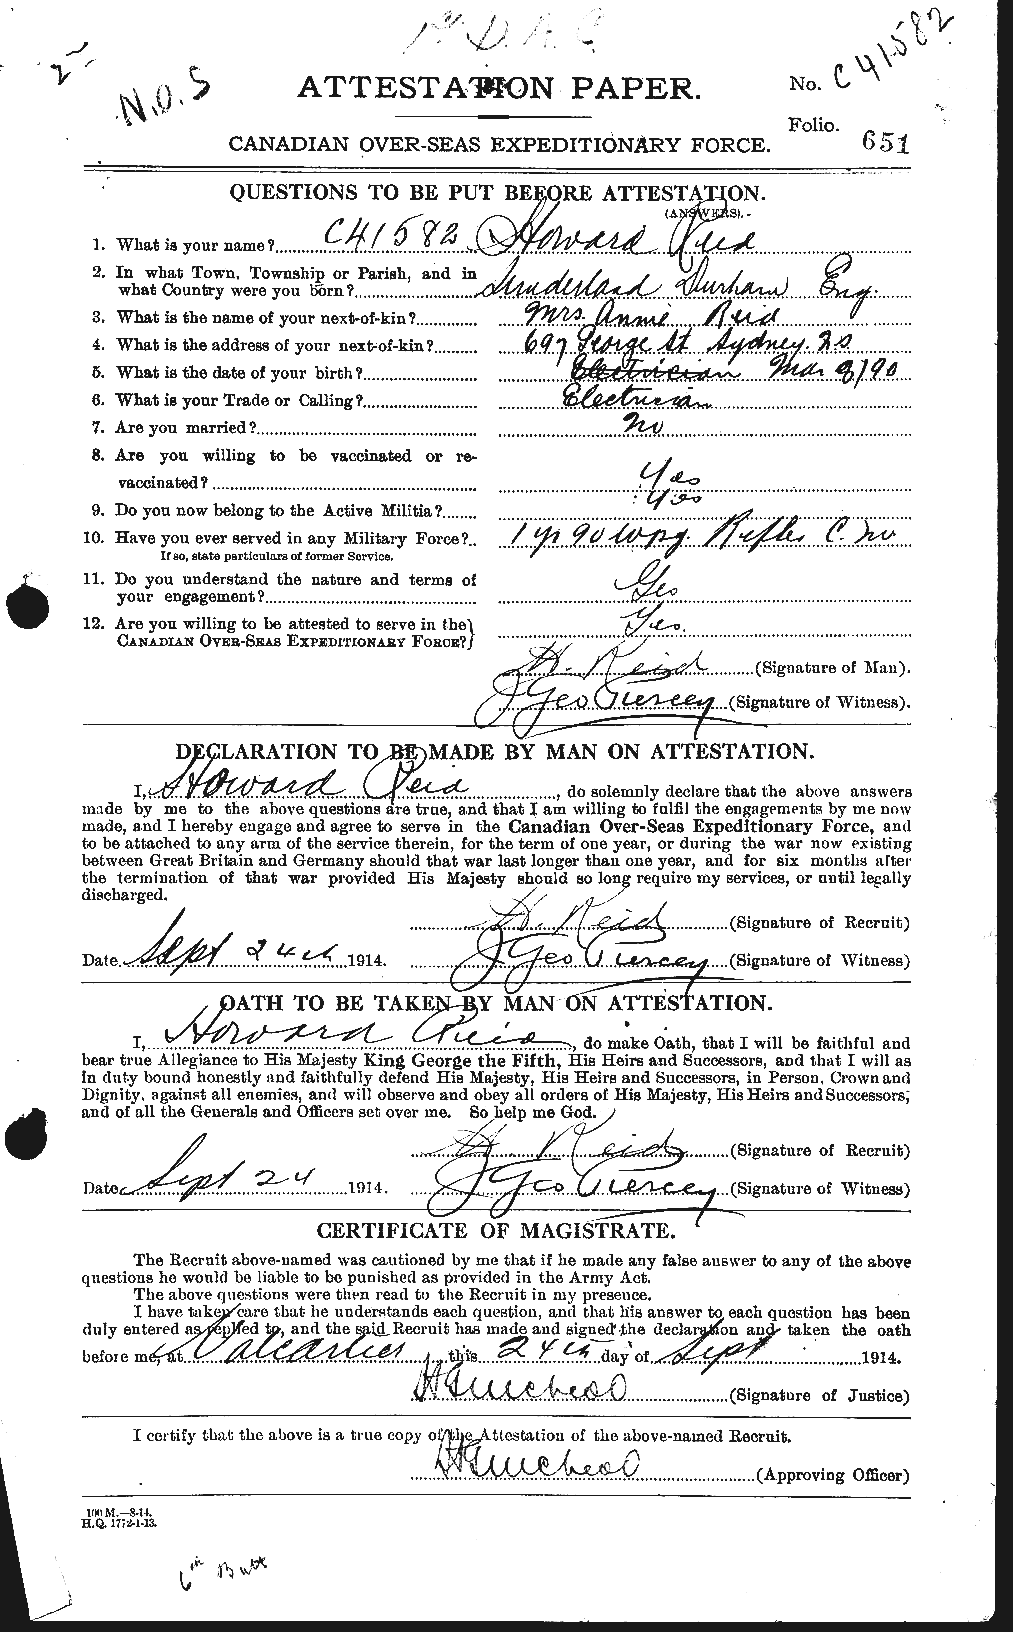 Personnel Records of the First World War - CEF 598616a